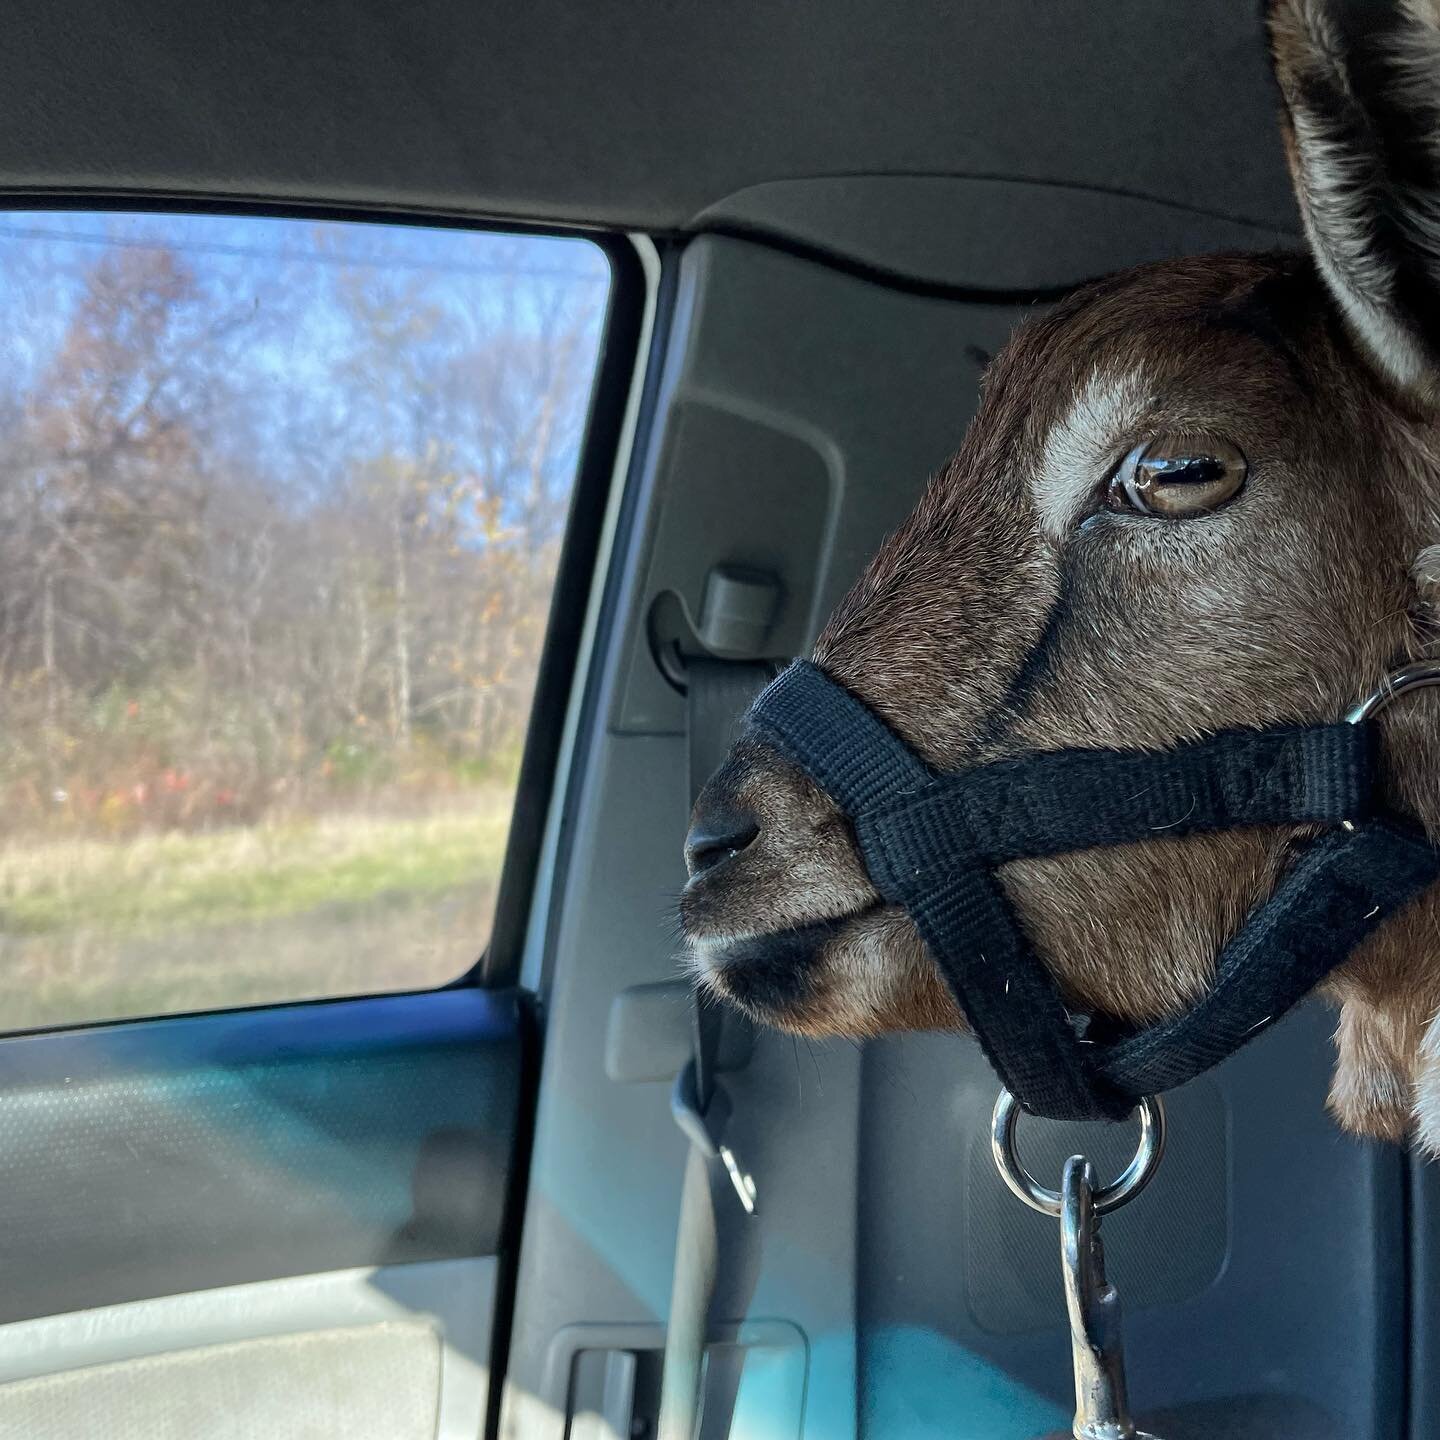 Fawn is the G.O.A.T!  She caught a little scenery today on her way to the vet for a simple procedure. Big day for this little gal!
#goatlove #goatrescue #goatsofinstagram #goatsanctuary #animalrescue #animalwelfare #farmsanctuary #michiana #ftw